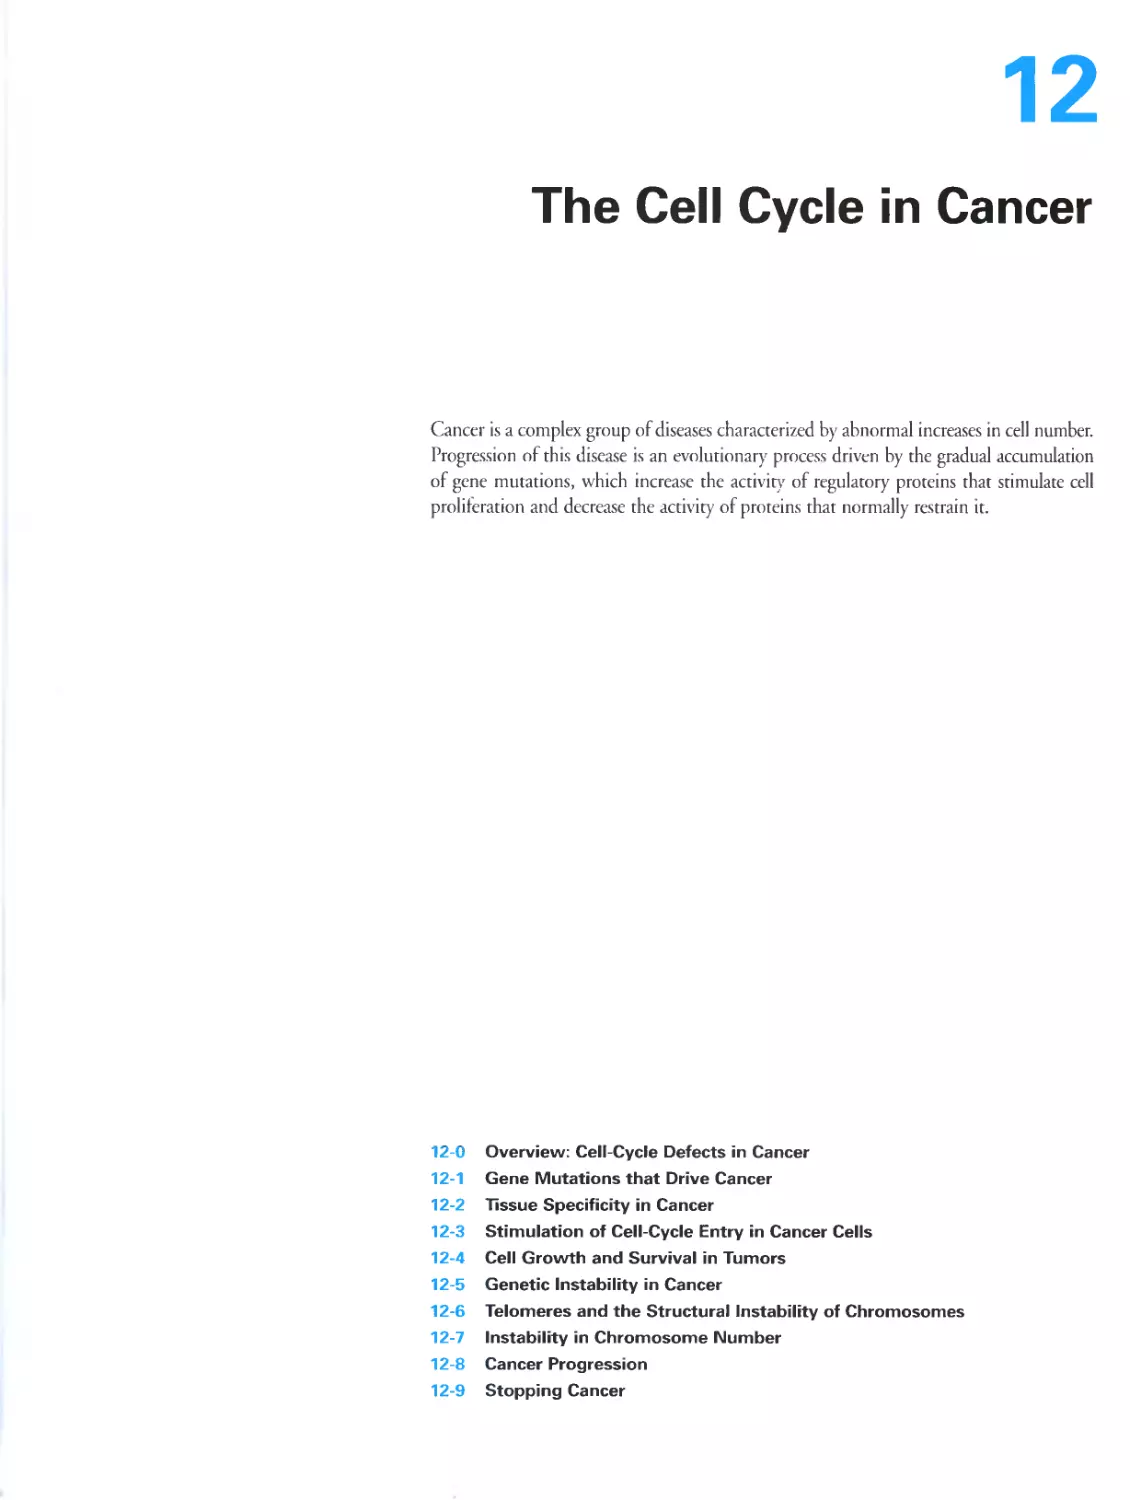 Chapter 12. The Cell Cycle in Cancer